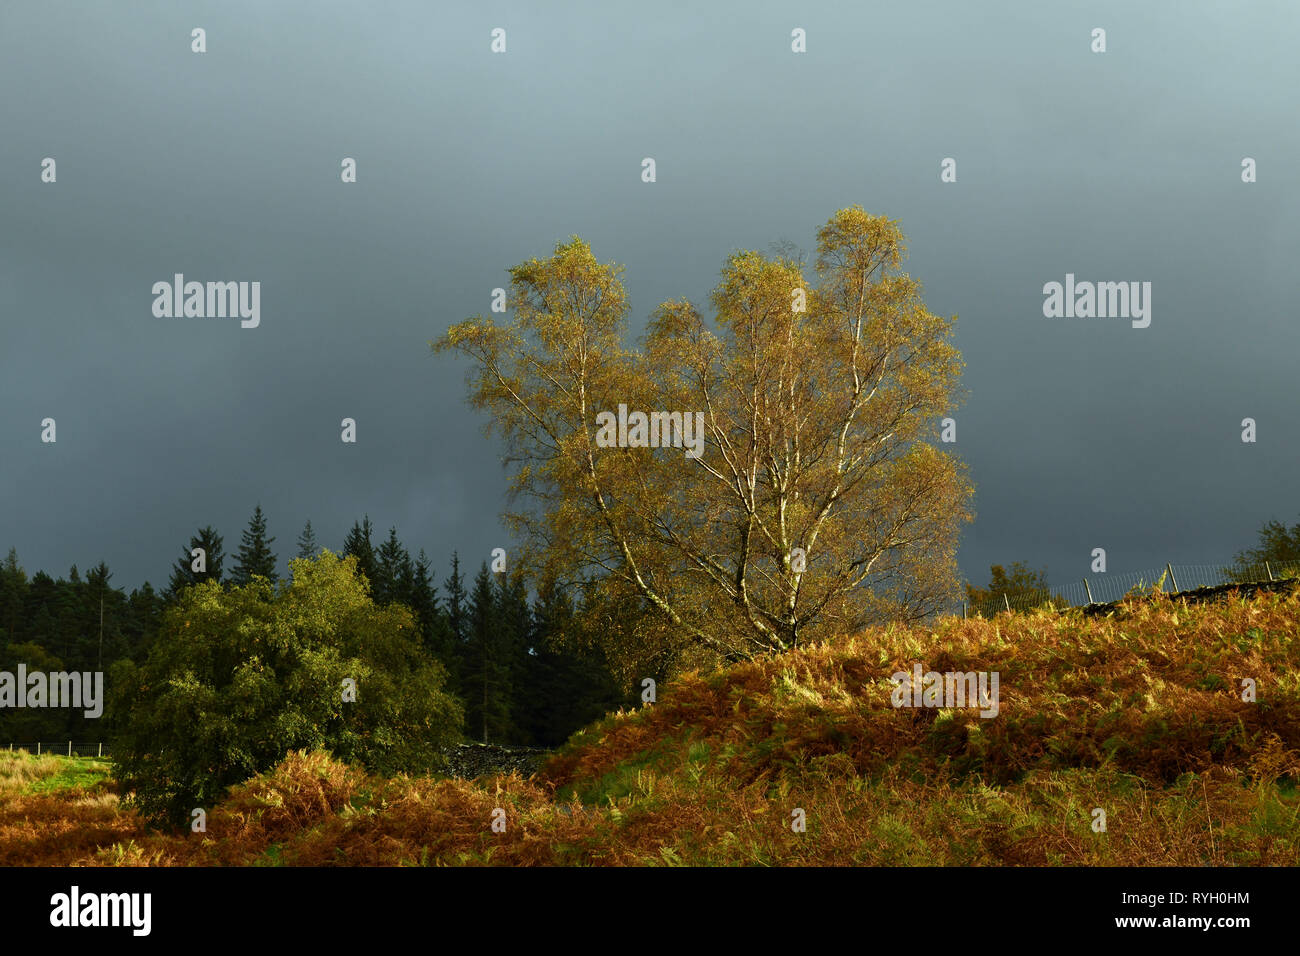 Silver Birch in autumn against a dark sky at Tarn Hows Lake District National Park. The light lasted for10 seconds and captures autumn beautiffuly. Stock Photo